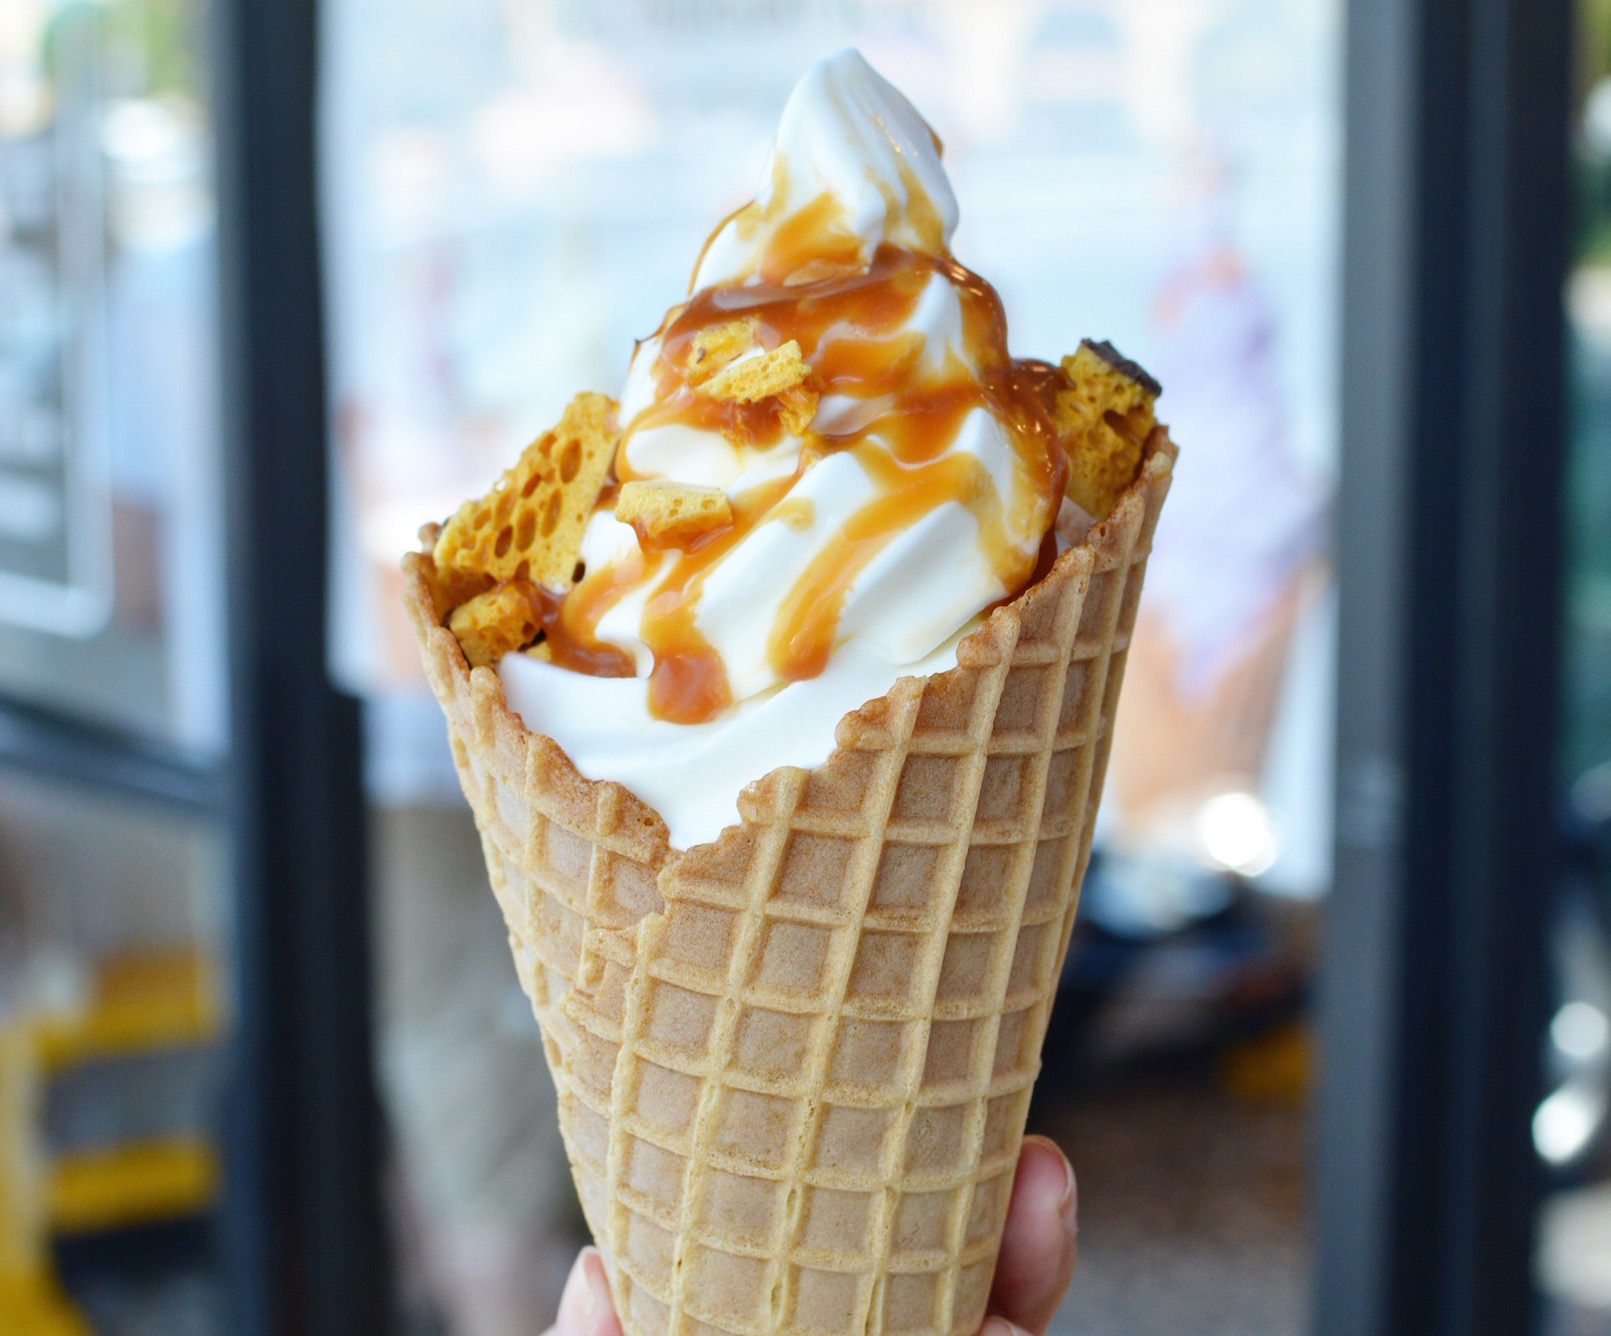 A soft serve ice cream inside a cone with a drizzle of caramel